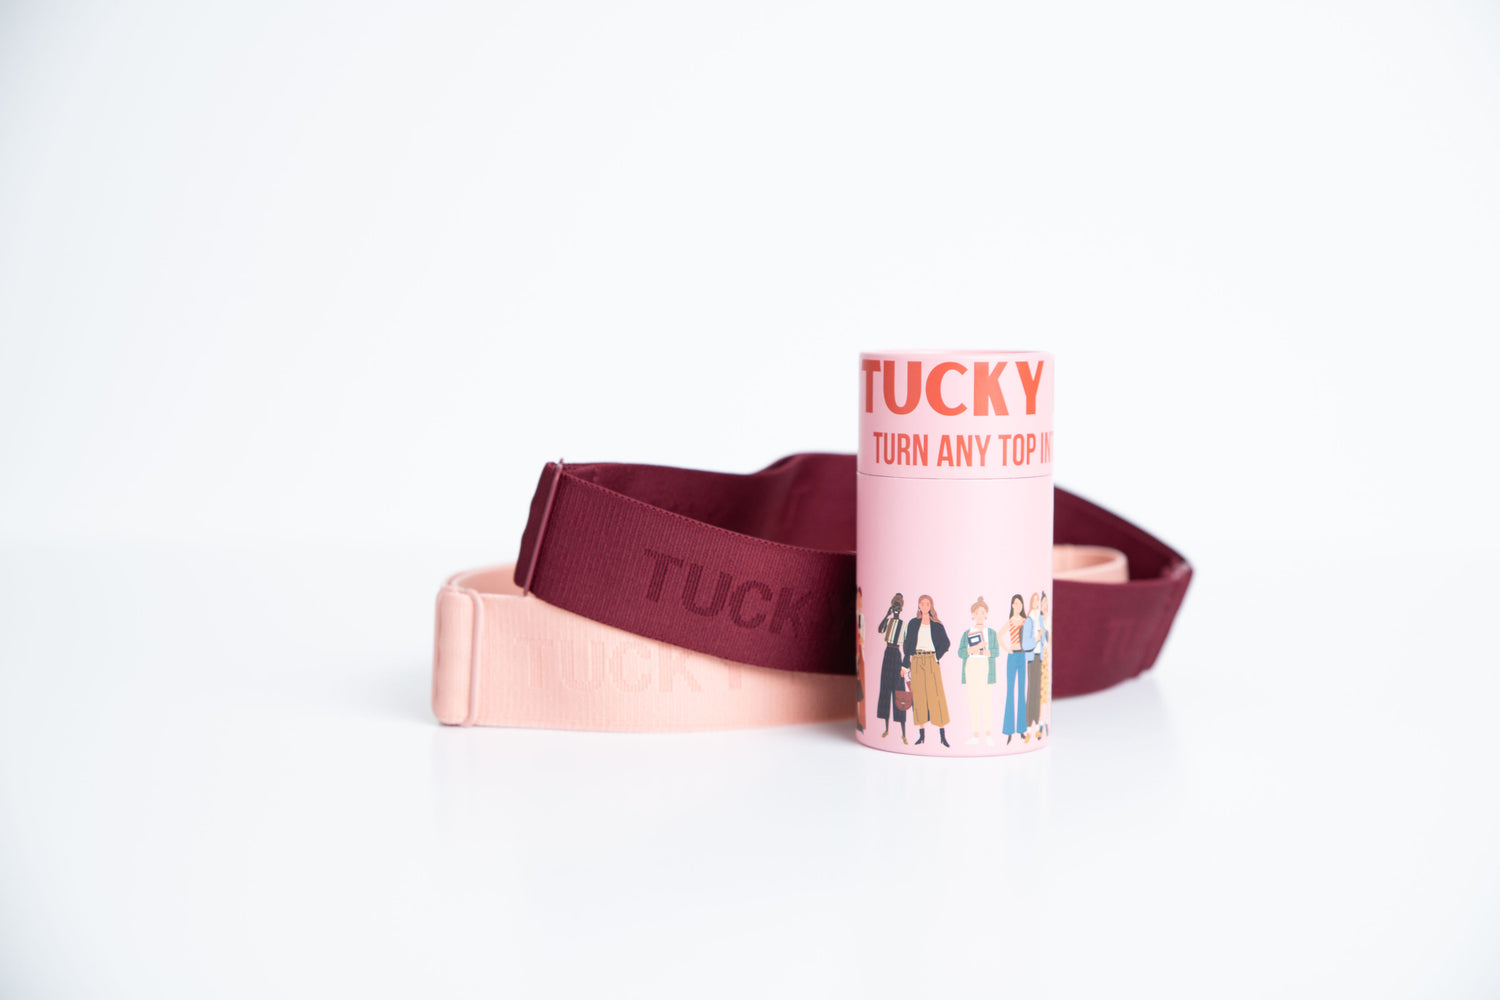 If you love a cropped look, you NEED the tucky belt! Turn any top into a  crop, we are obsessed!🥰